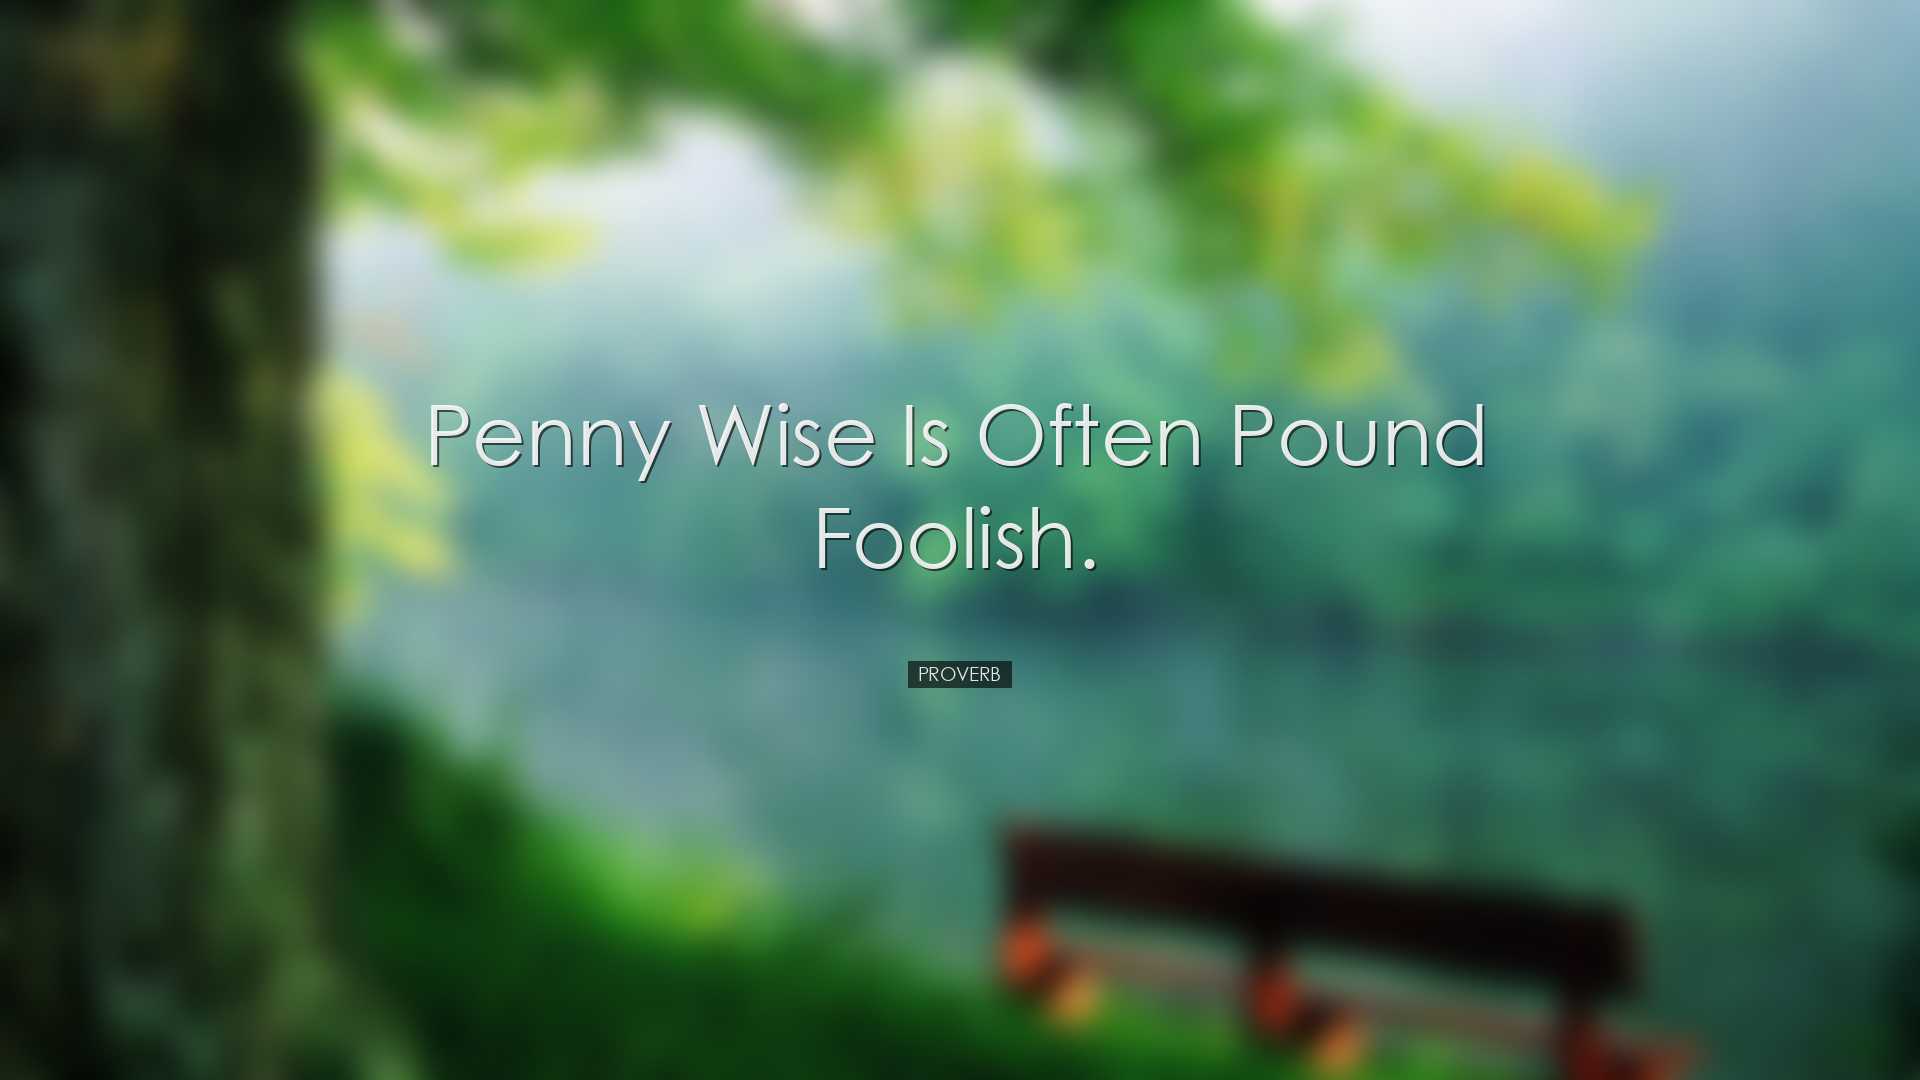 Penny wise is often pound foolish. - Proverb